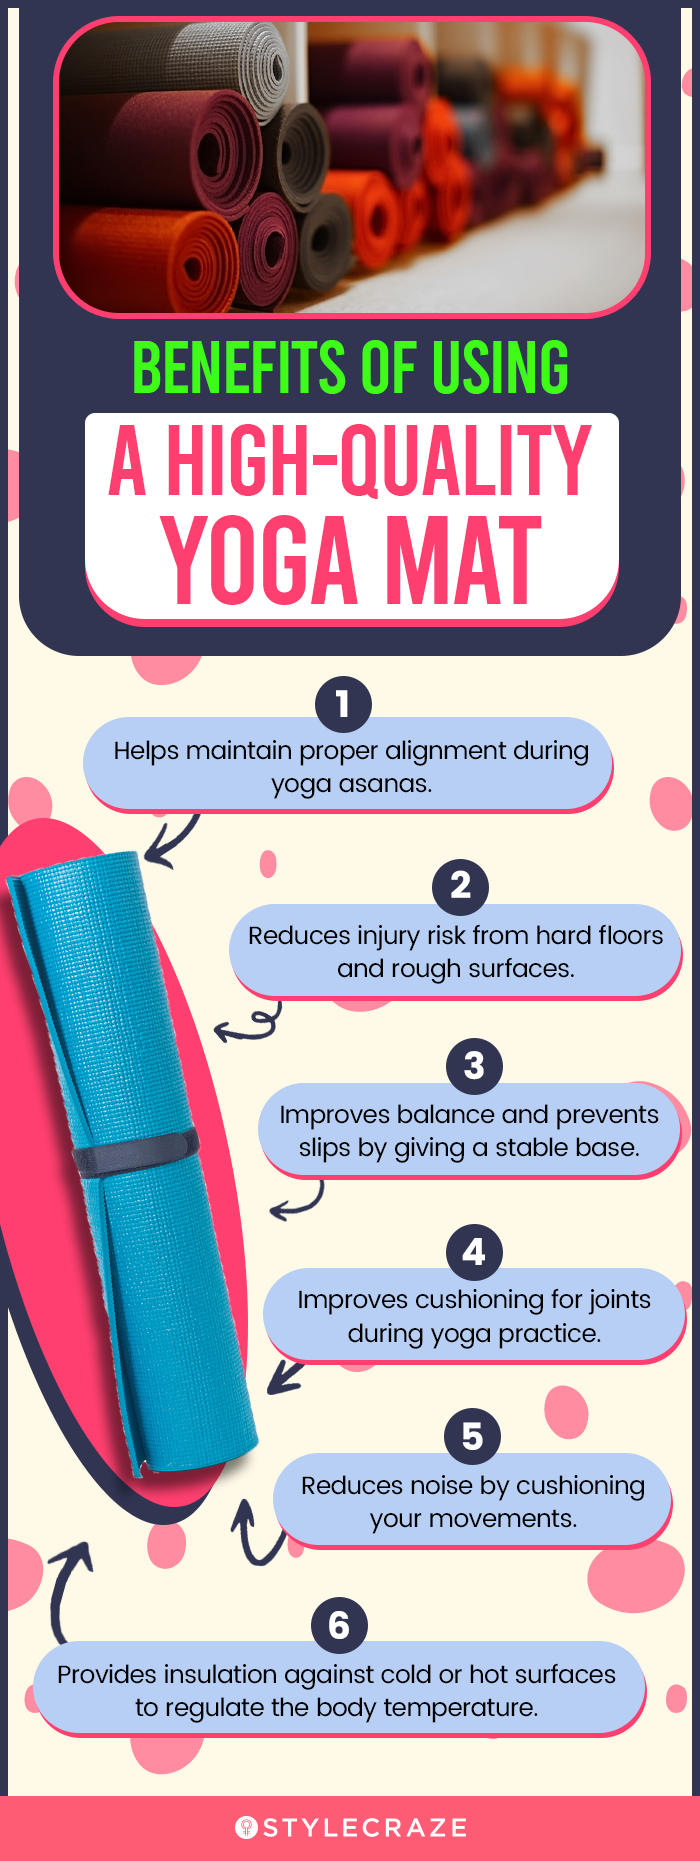 Benefits Of Using A High-Quality Yoga Mat (infographic)